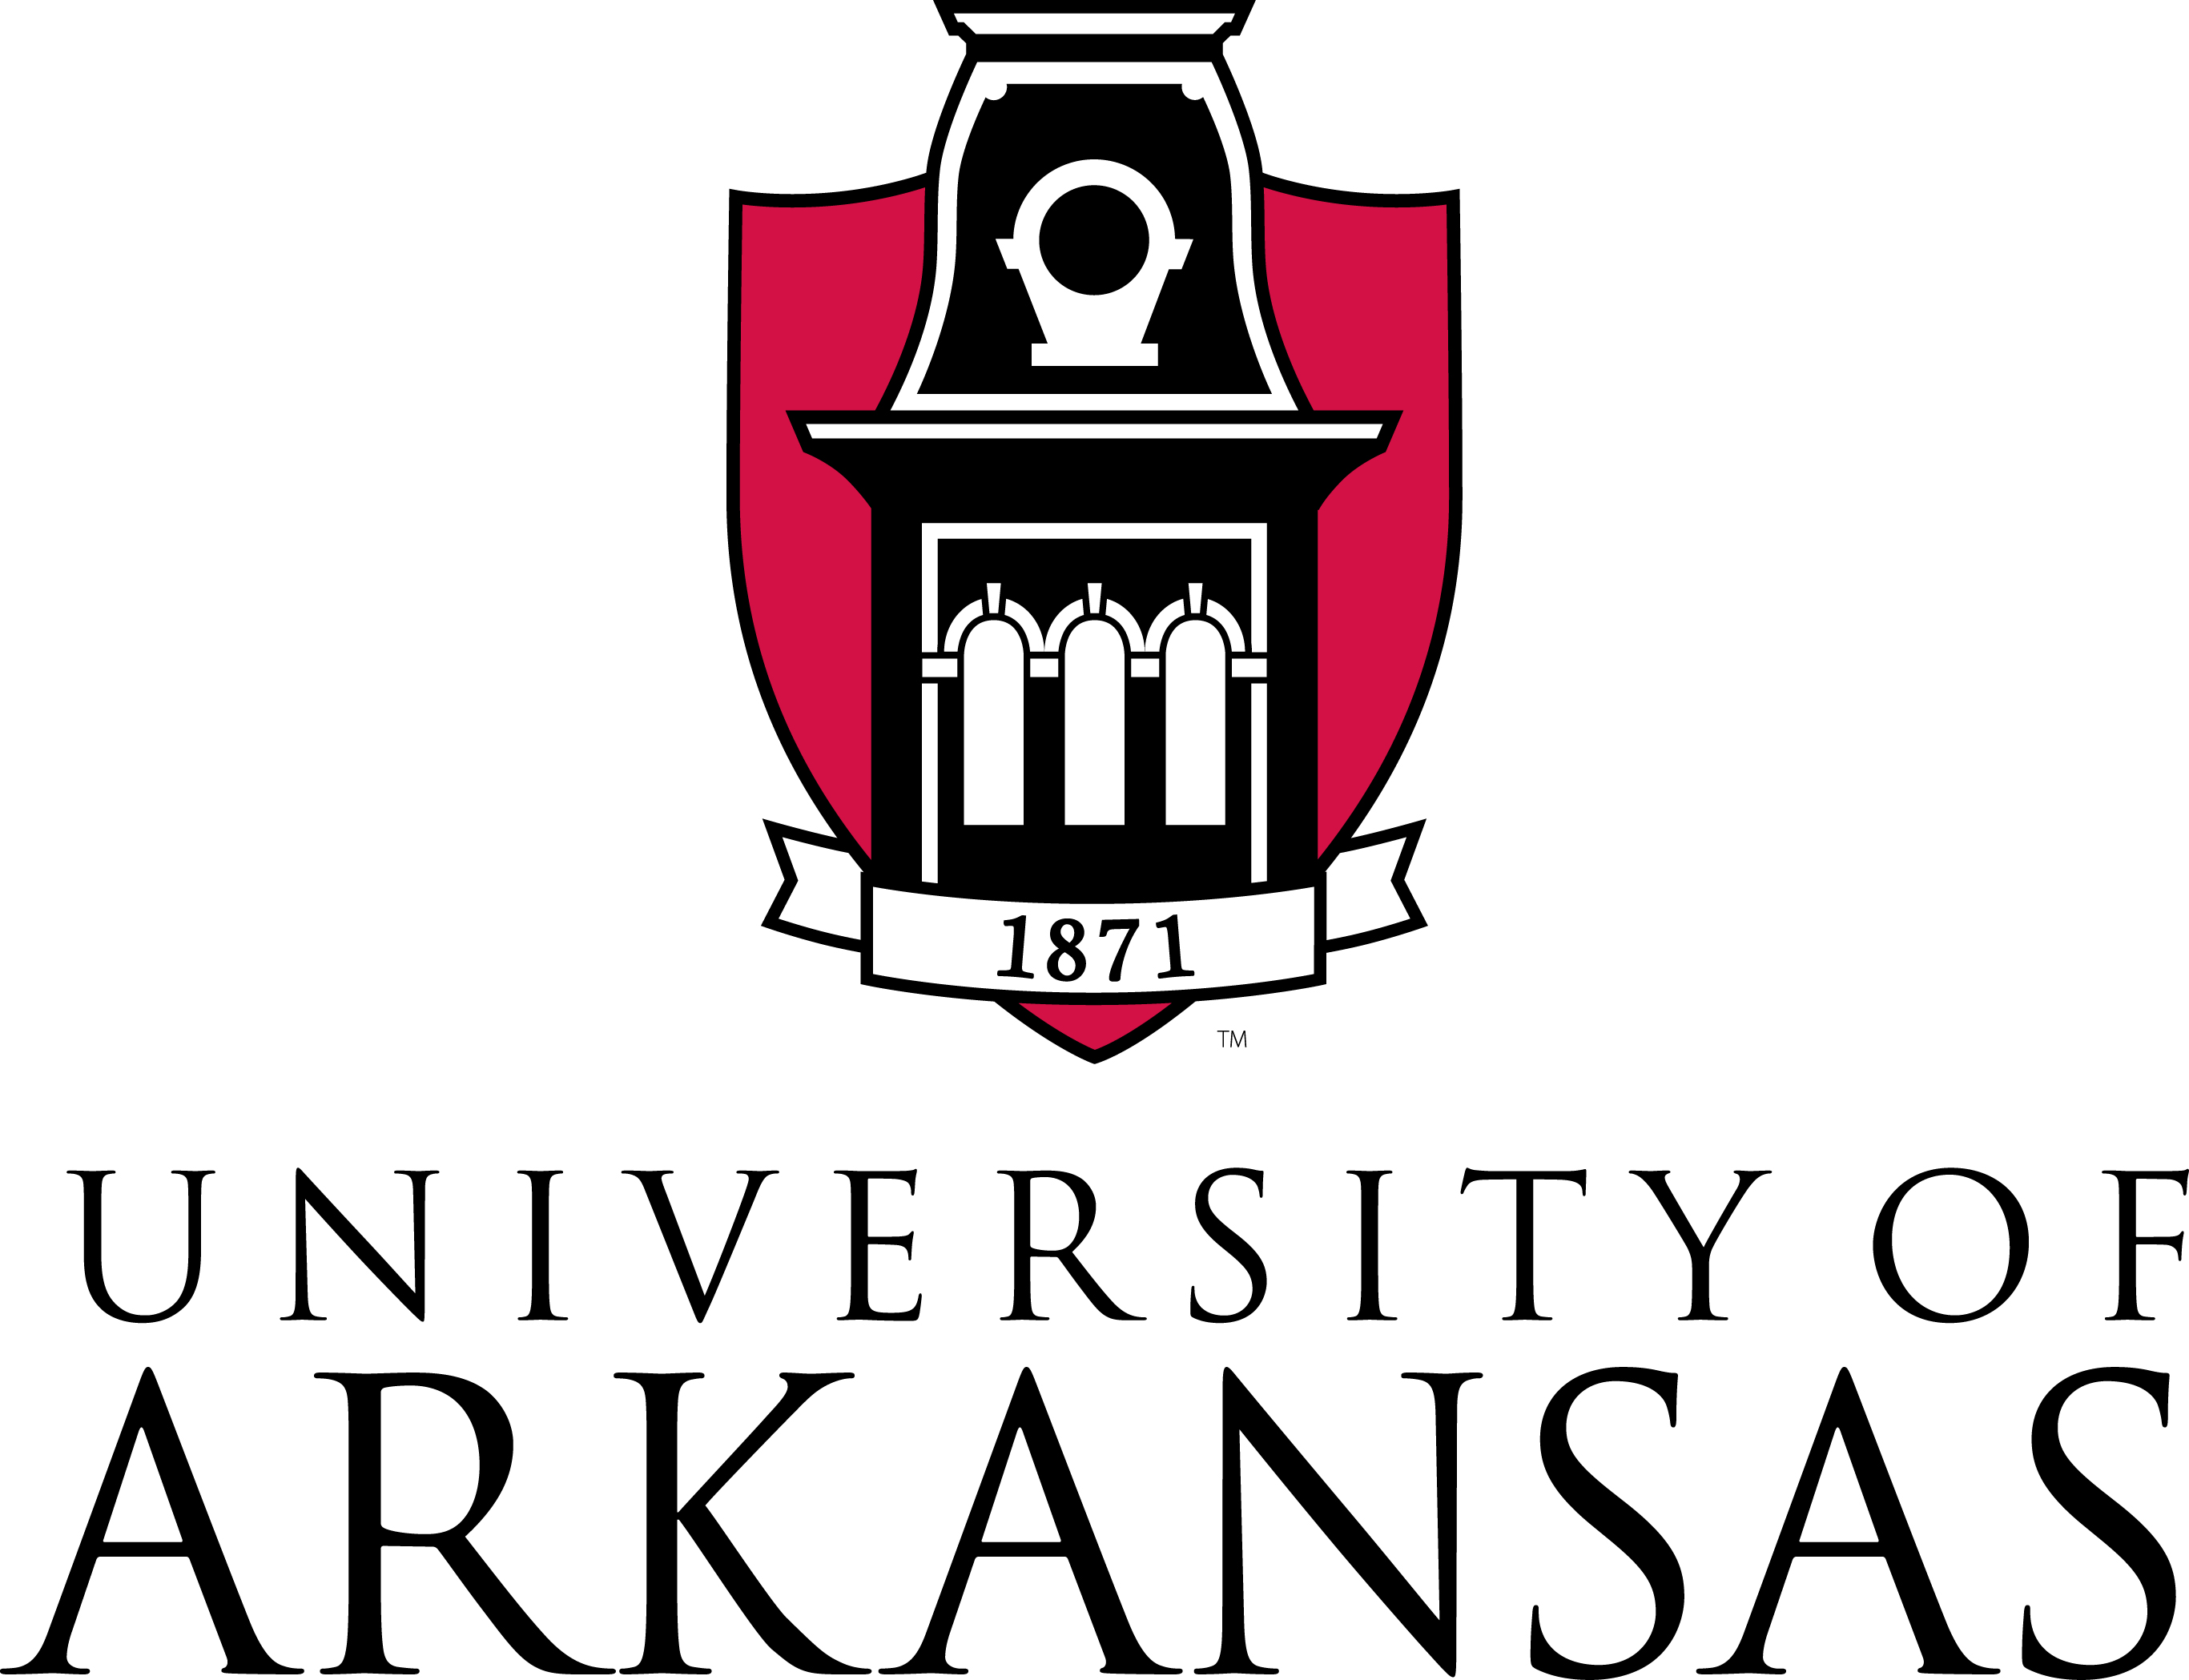 What the University of Arkansas controversy can teach us about archival permission practices